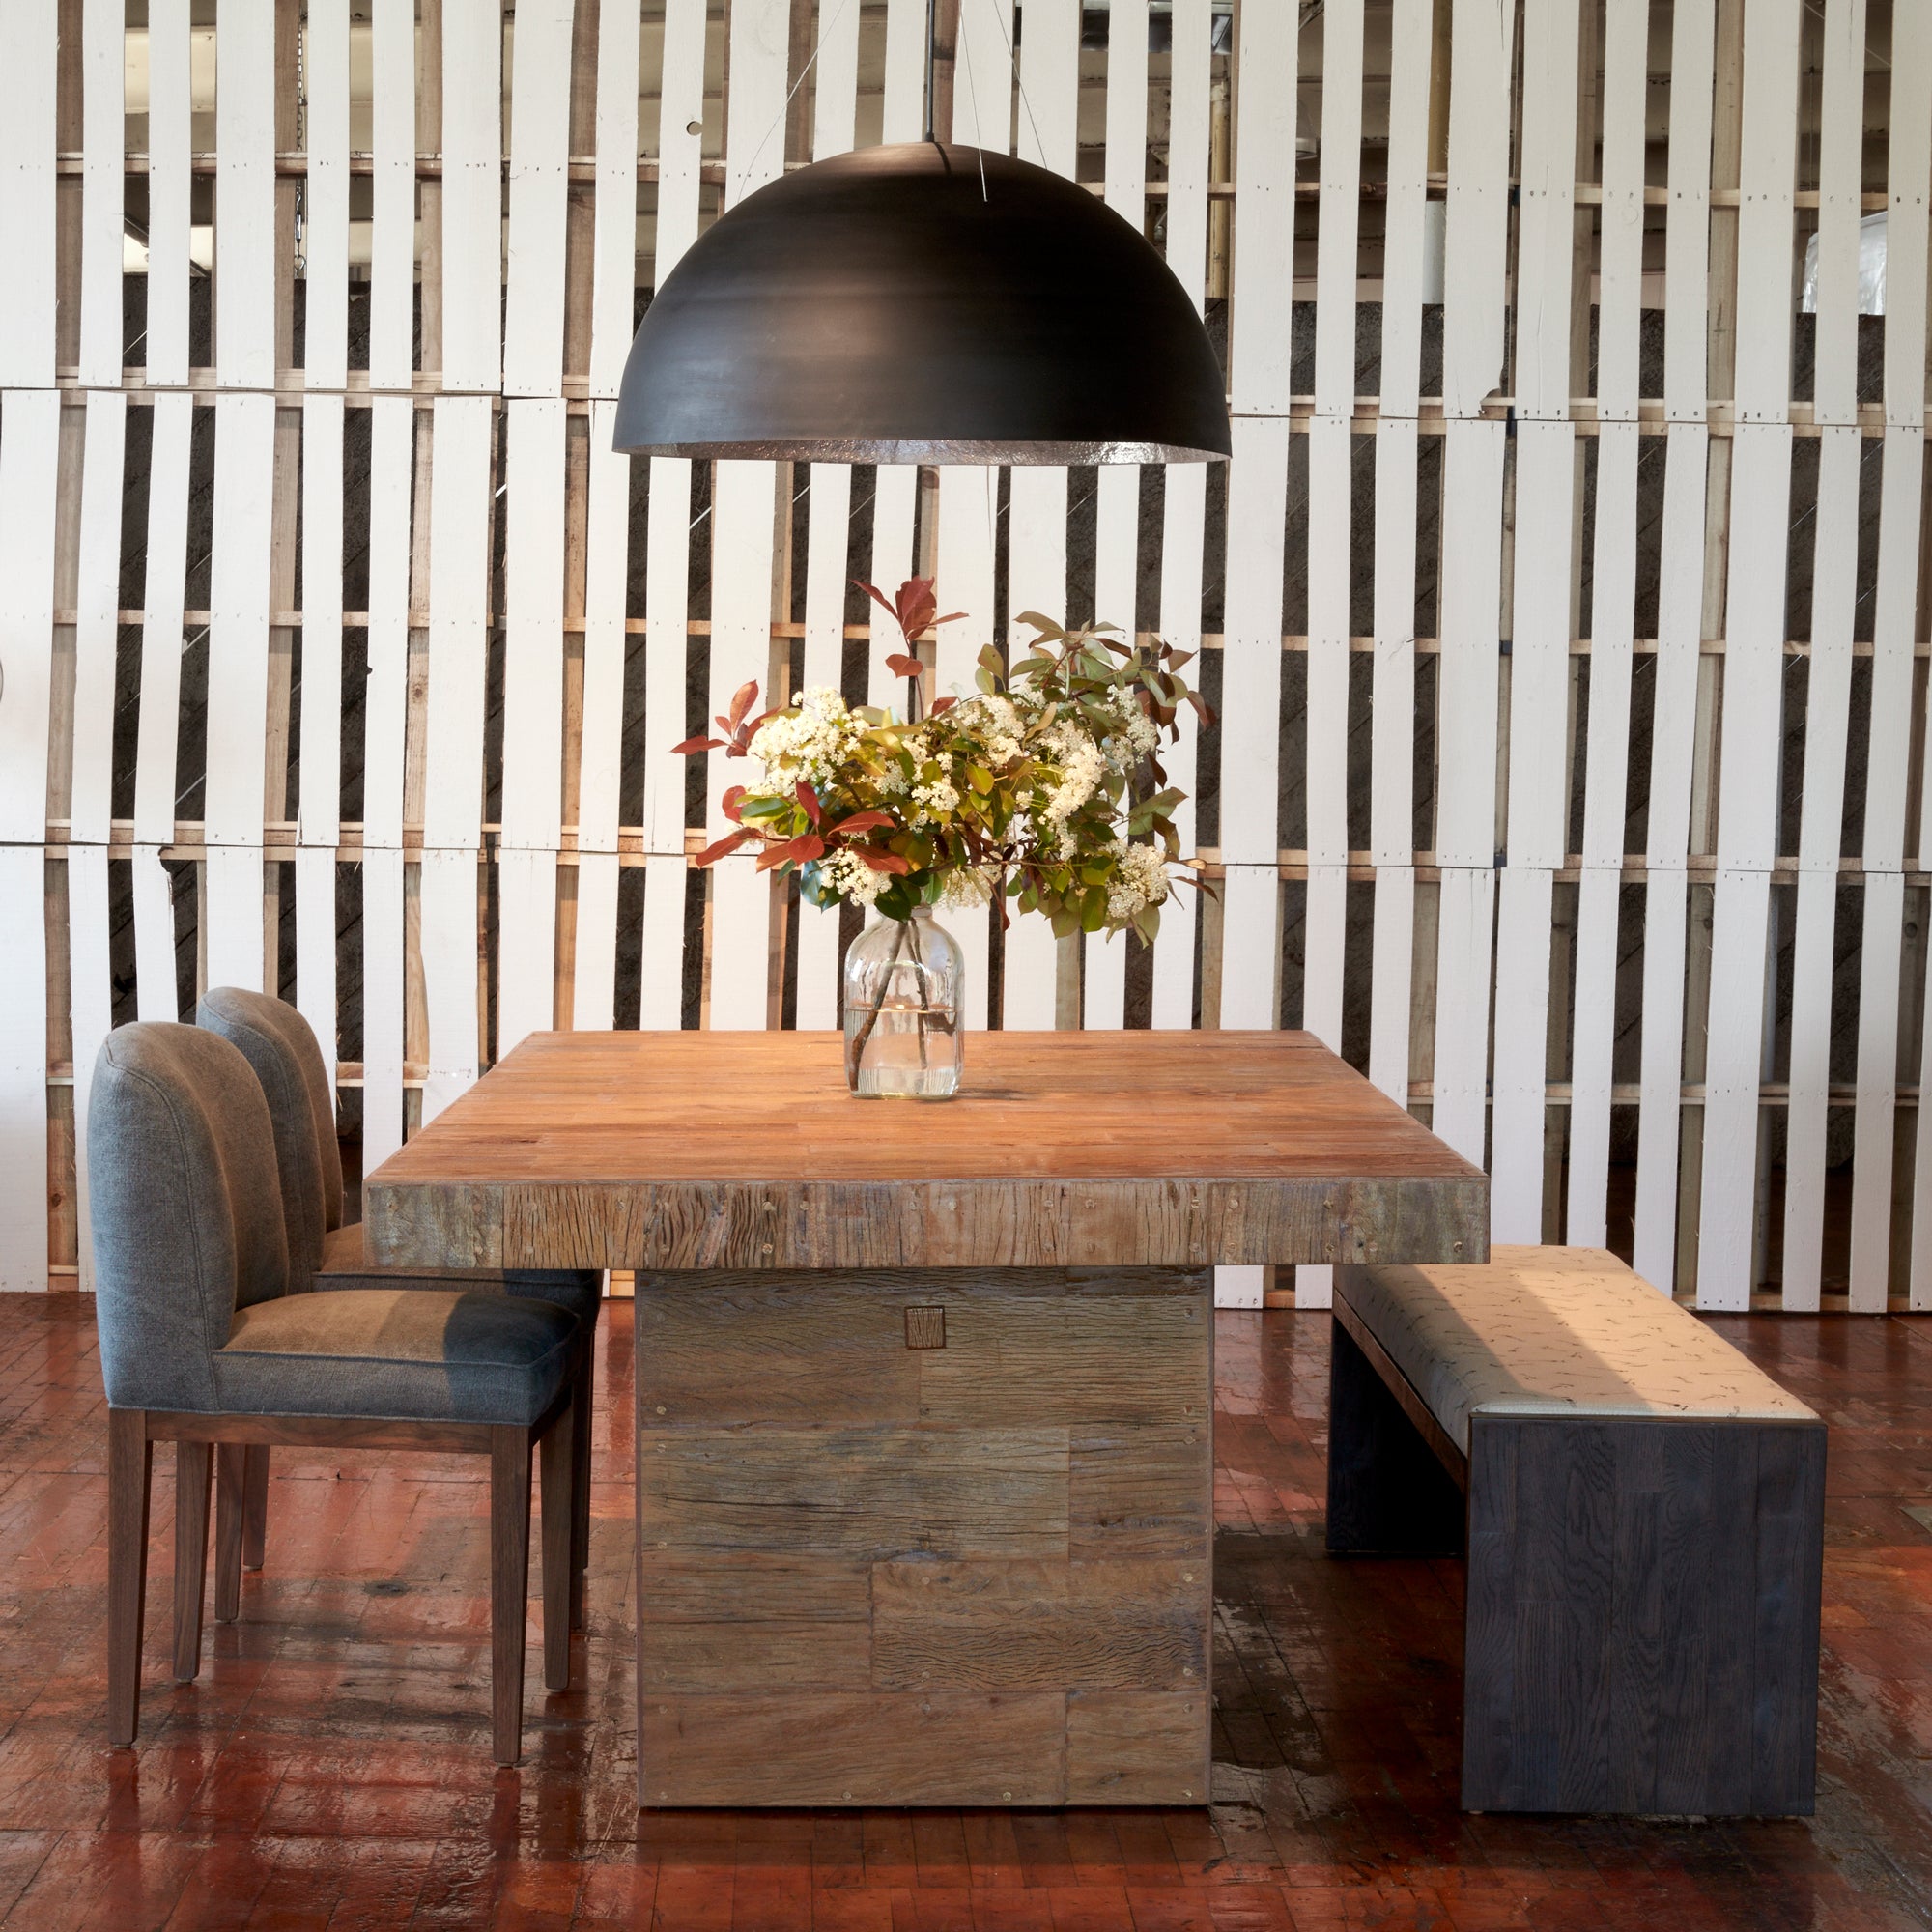  Reclaimed wood dining table shown with upholstered chairs in a grey fabric on one end and a bench for additional seating on the other end. Above dining table is the Bolle Pendant which is a circular pendant in a black finish.  